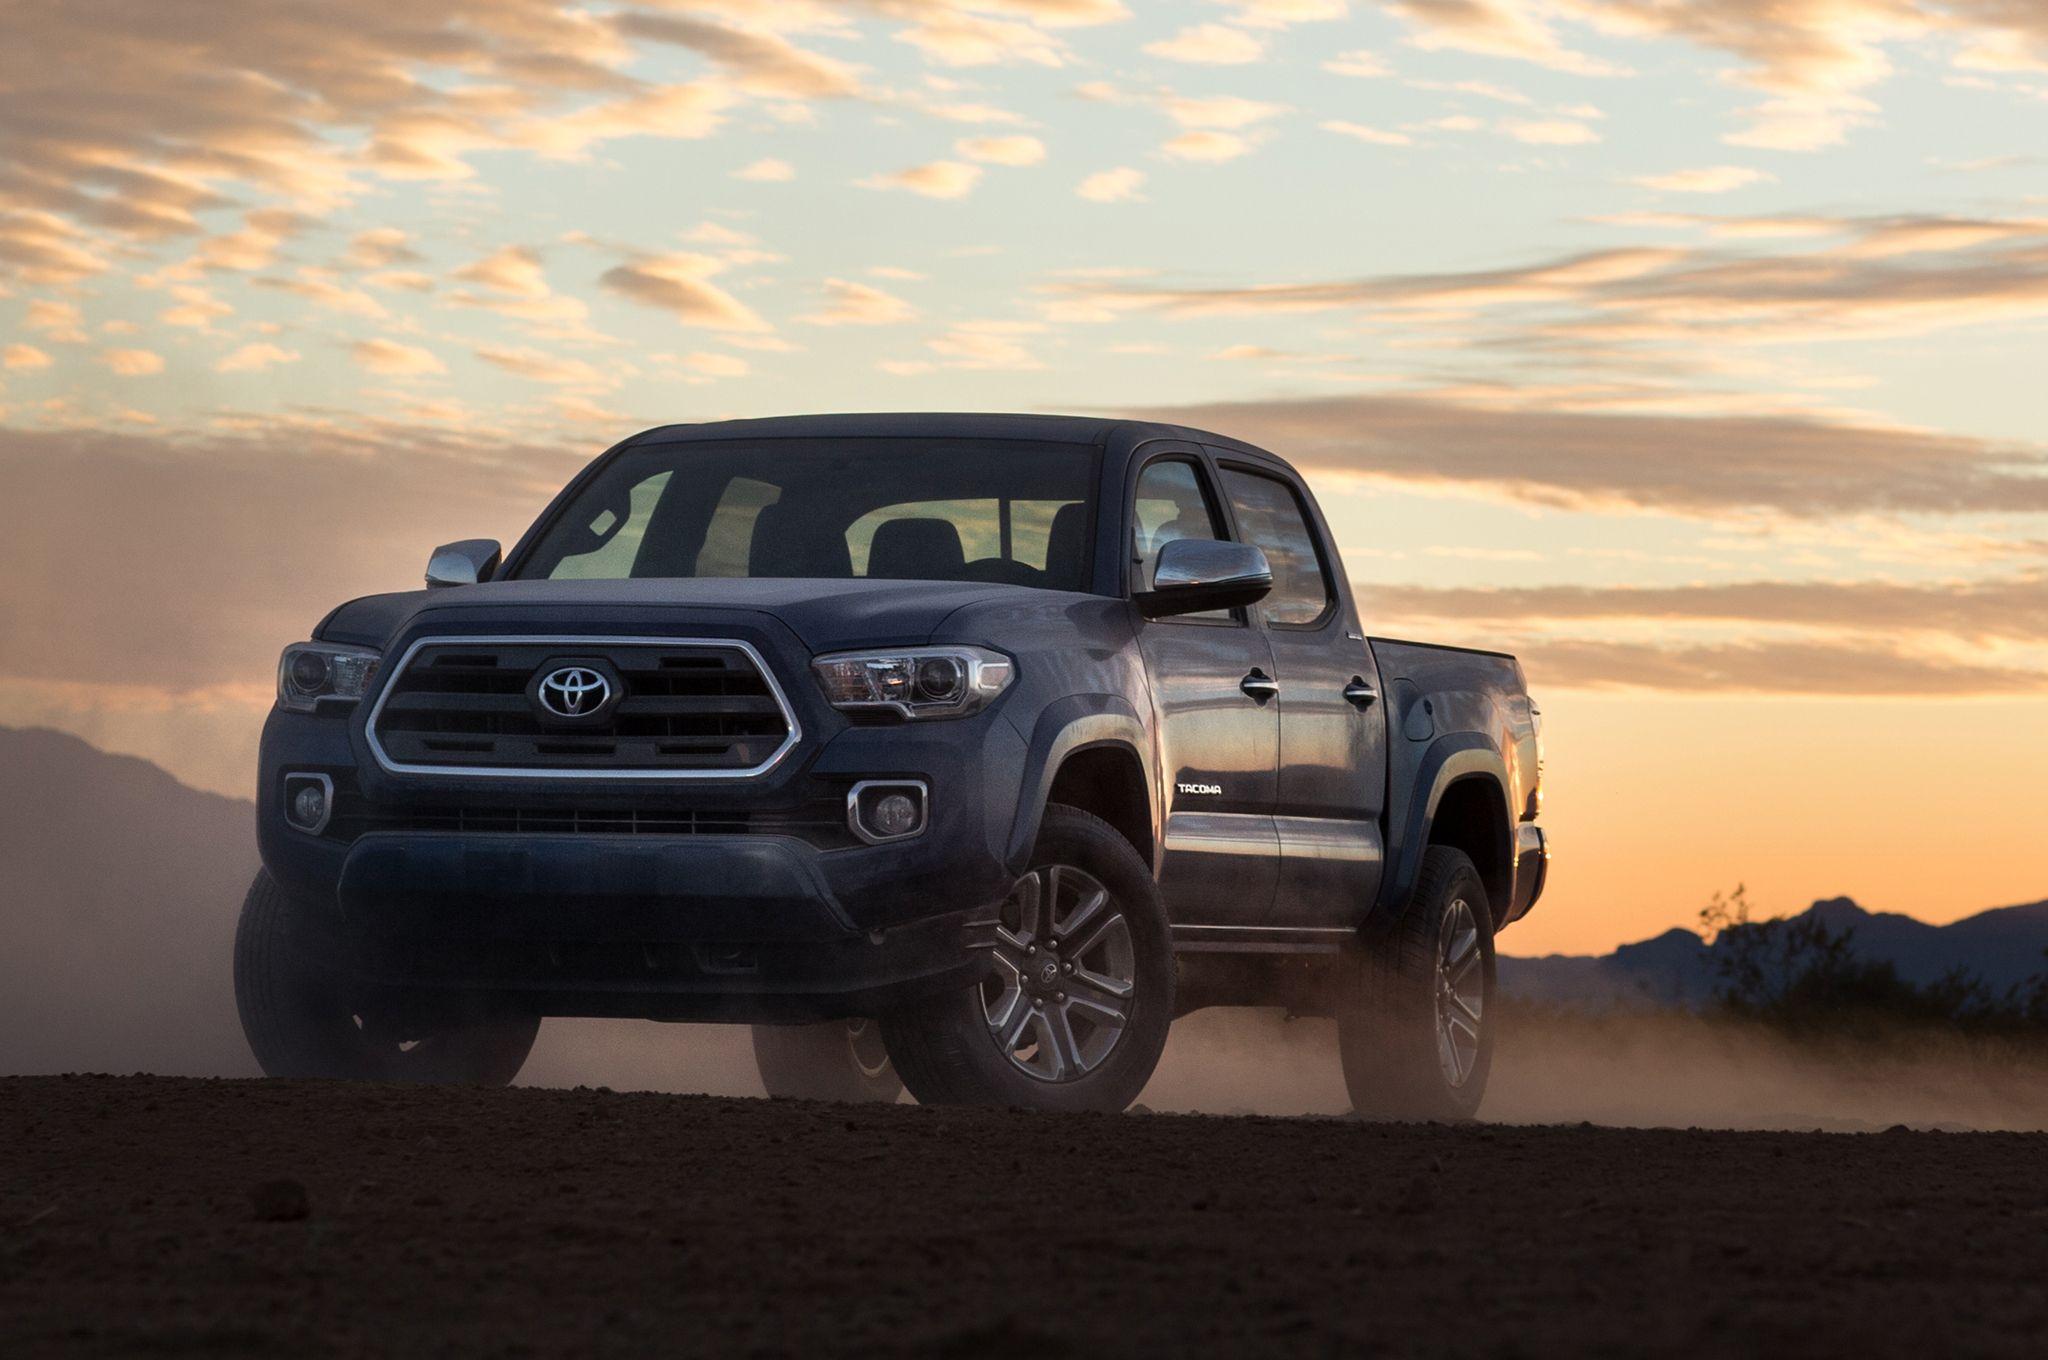 Things to Know About the 2016 Toyota Tacoma